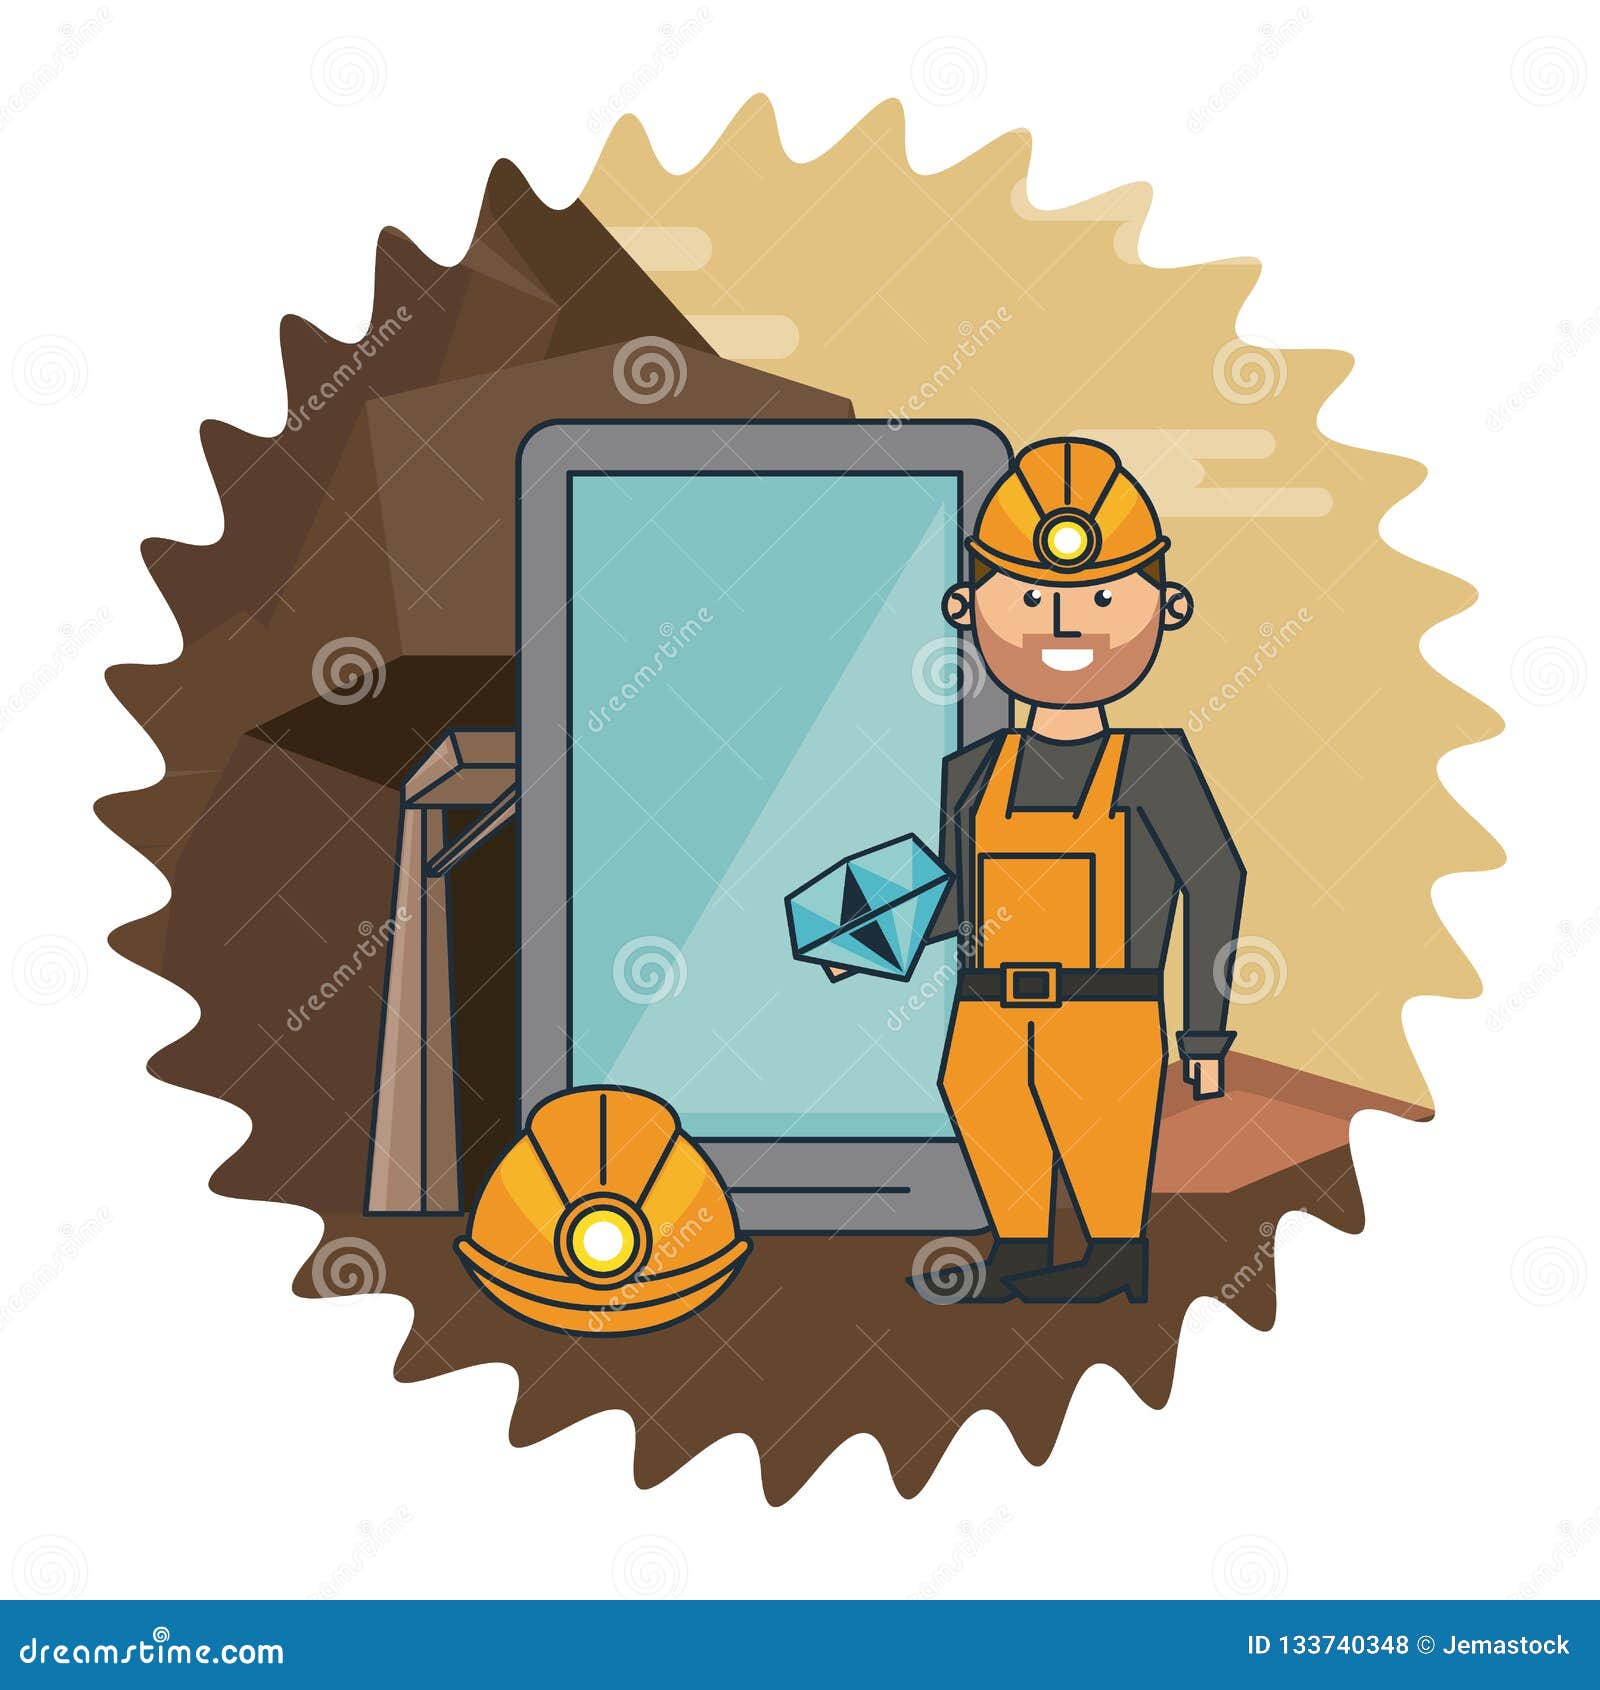 Bitcoin Mining And Investment Stock Vector - Illustration ...